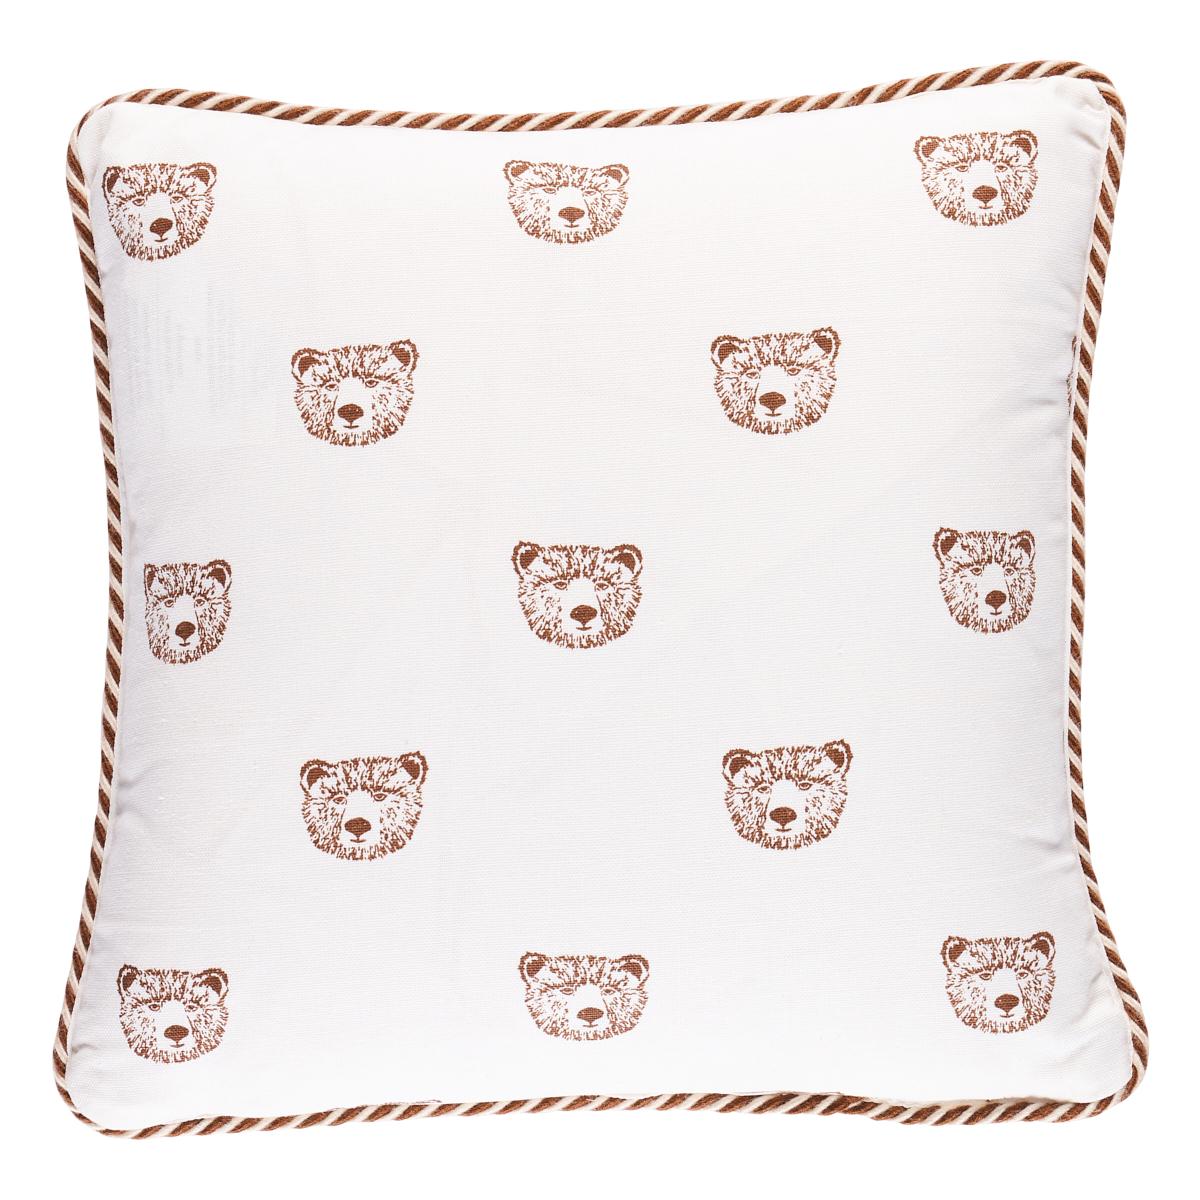 This pillow features Bear High Performance Print by Marie-Chantal of Greece for Schumacher. Marie-Chantal’s Bear High Performance Print in ivory is a small-scale ursine pattern on a cotton-linen ground. Pillow is finished with a welt in Capri